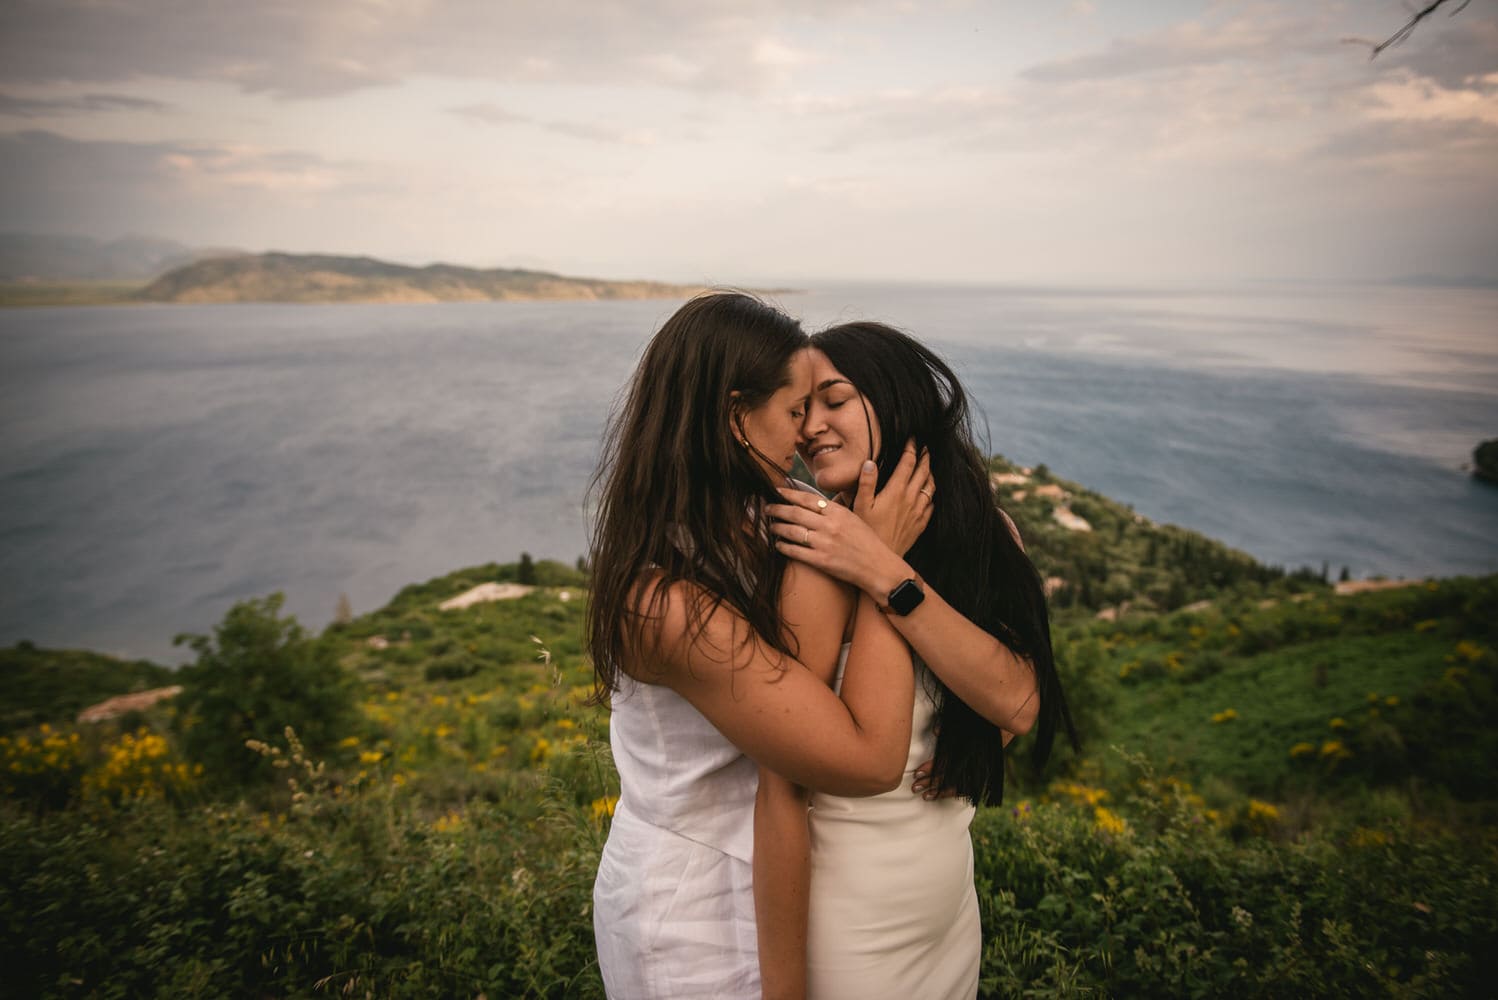 Seaside harmony: Brides walk along the shore, love's rhythm echoed by the waves during their Corfu elopement.